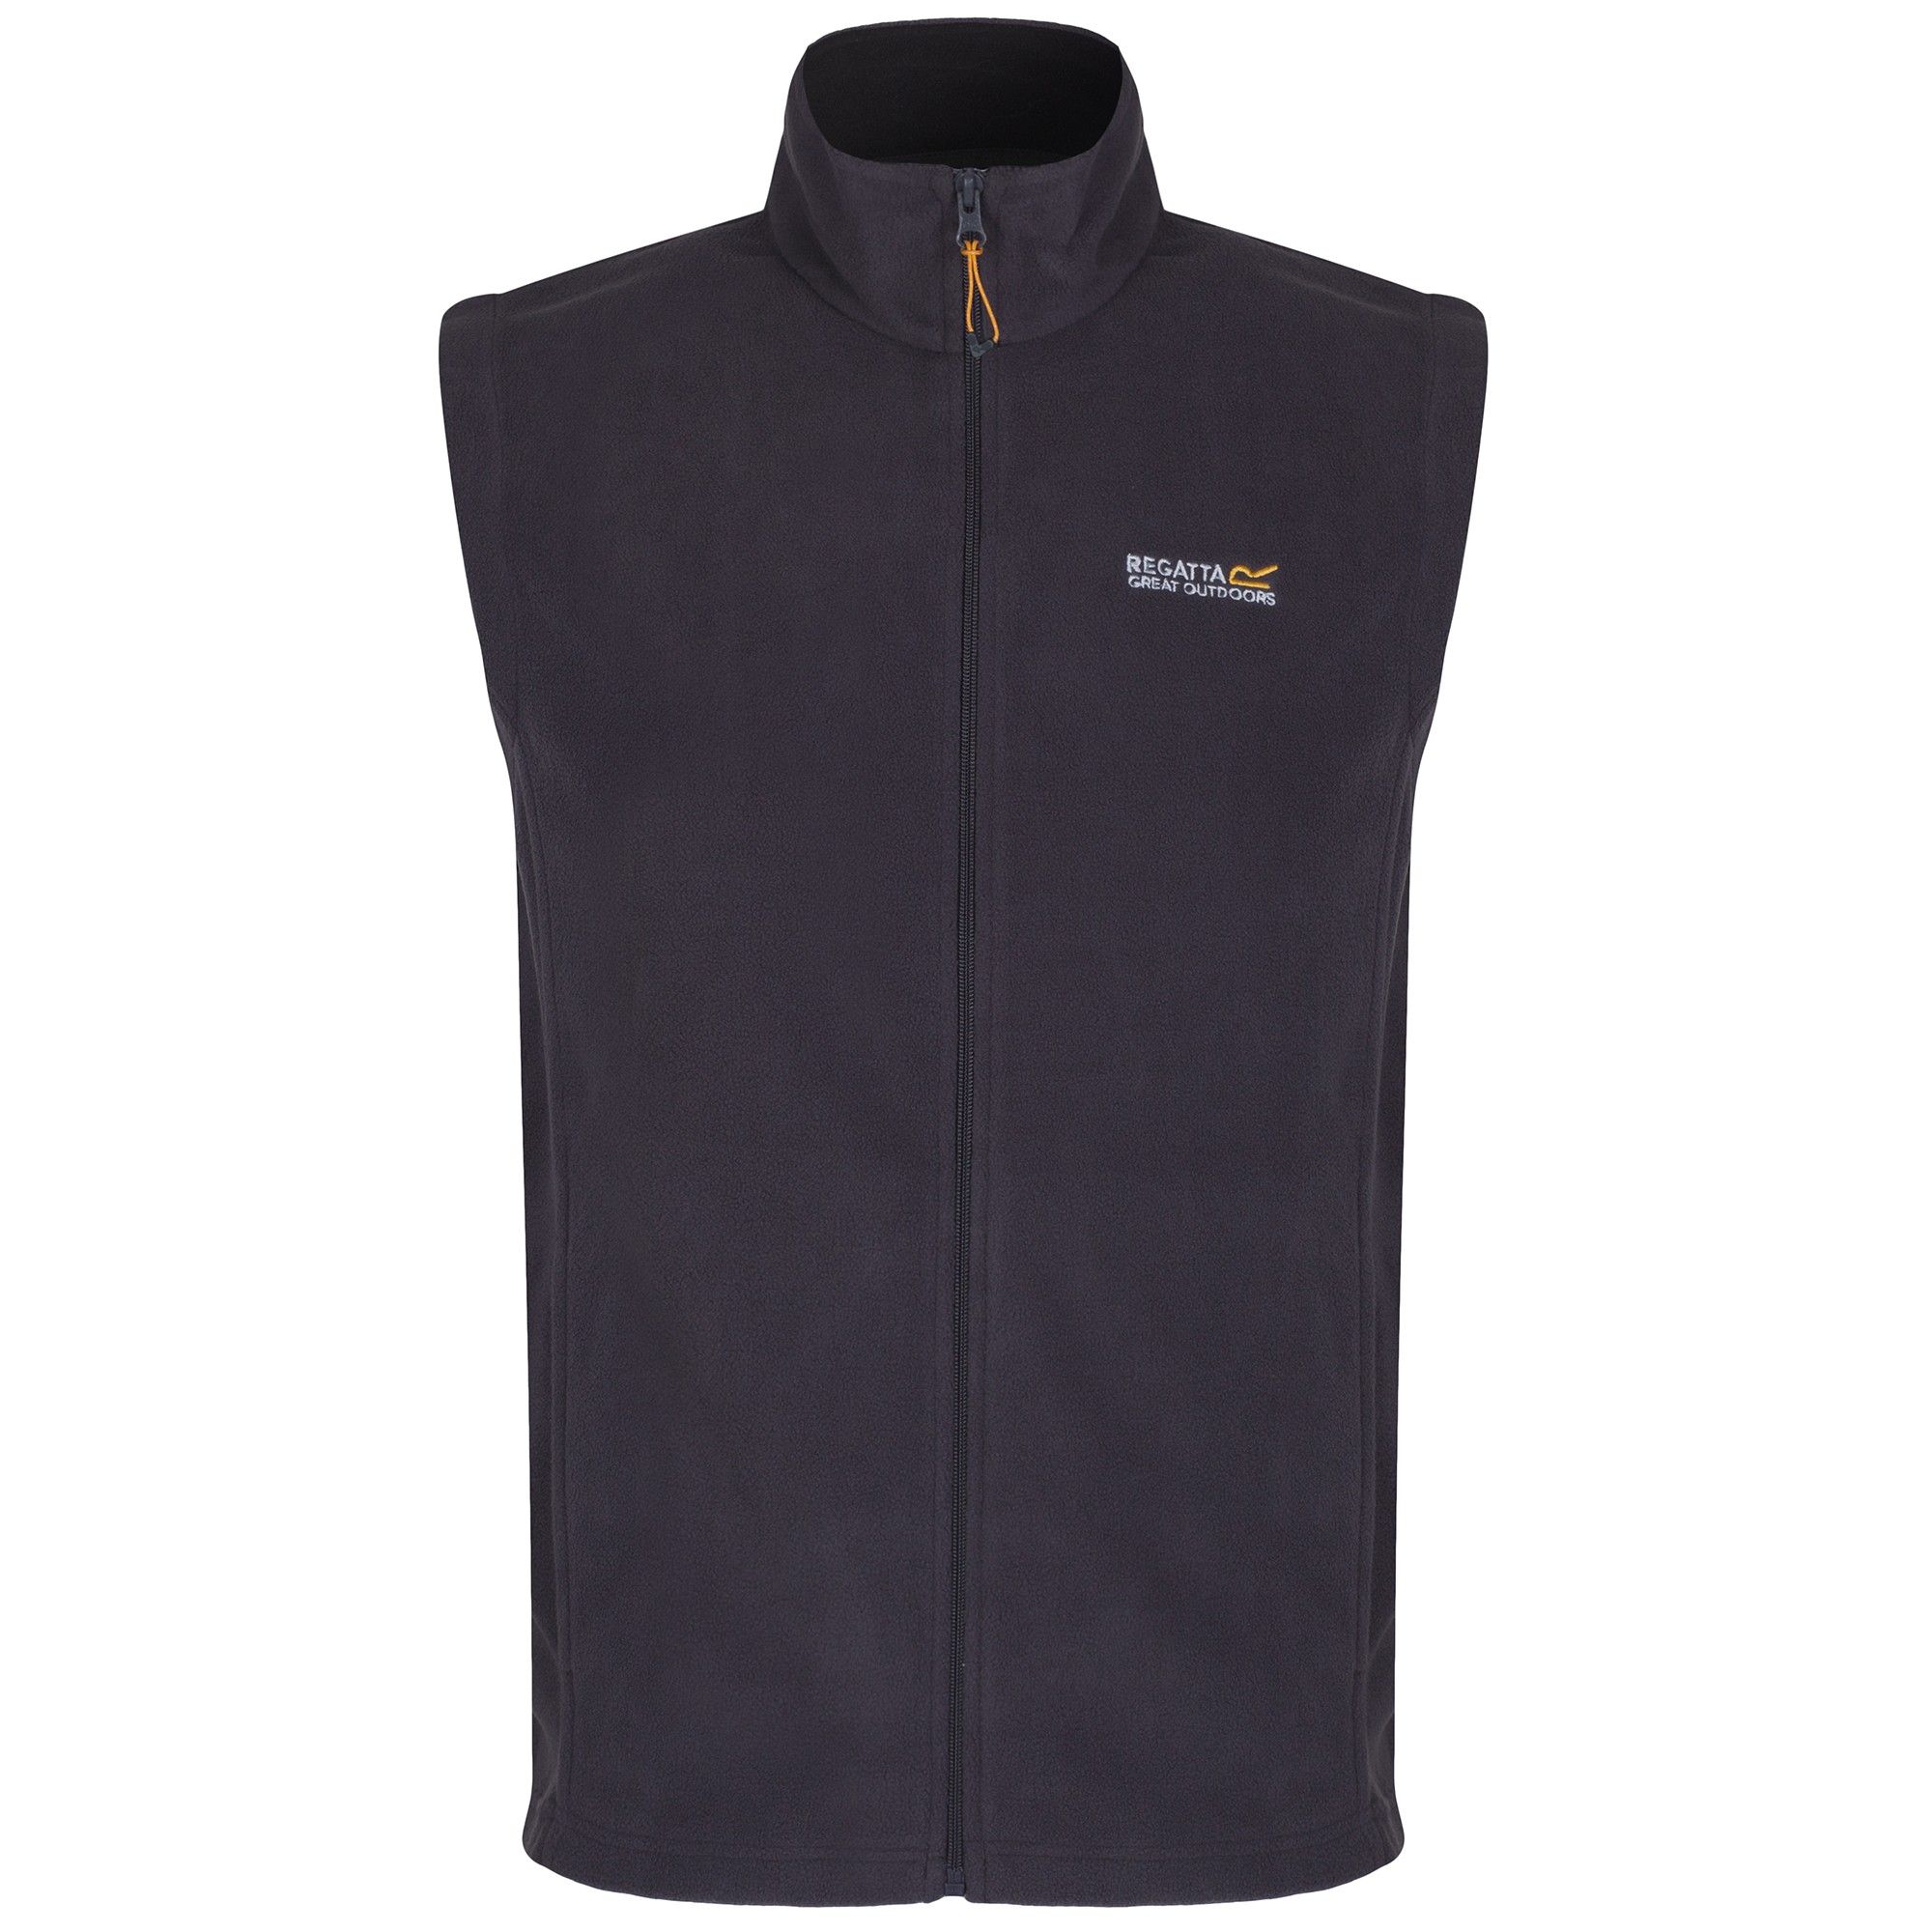 The mens Tobias II is a popular four-season fleece bodywarmer, loved for both its great value and quality. Its cut with a relaxed, everyday fit from lightweight Symmetry fleece with a full zip fastening. Pop it on over shirts when theres a nip in the air or layer it under jackets for extra warmth during winter months. 100% Polyester. Regatta Mens sizing (chest approx): XS (35-36in/89-91.5cm), S (37-38in/94-96.5cm), M (39-40in/99-101.5cm), L (41-42in/104-106.5cm), XL (43-44in/109-112cm), XXL (46-48in/117-122cm), XXXL (49-51in/124.5-129.5cm), XXXXL (52-54in/132-137cm), XXXXXL (55-57in/140-145cm).